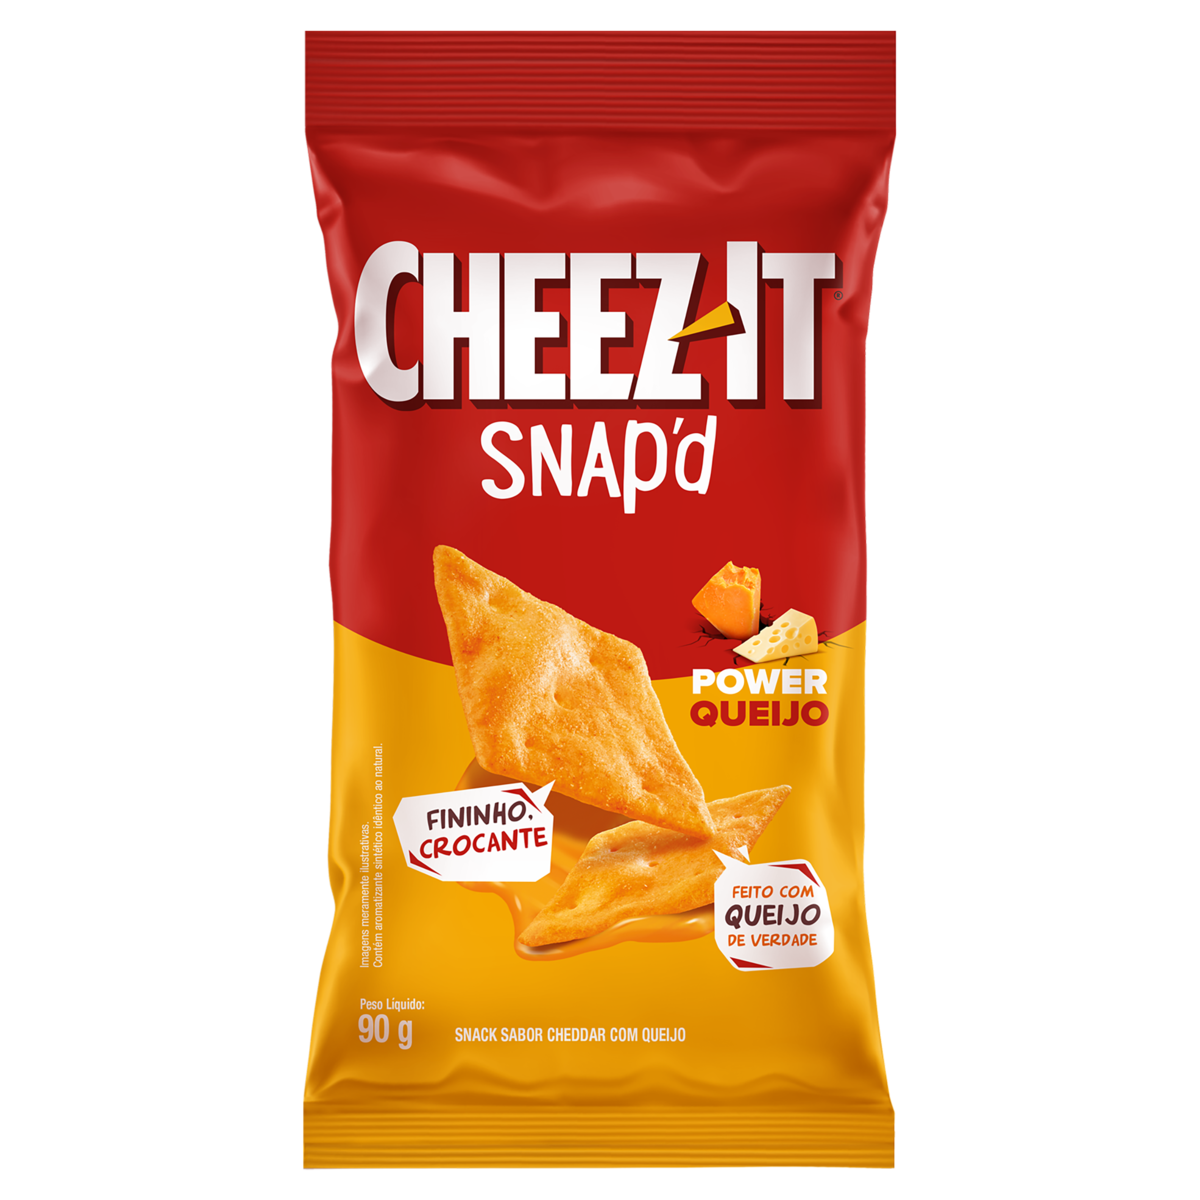 7896004007809 - SNACK POWER QUEIJO CHEEZ-IT SNAPD PACOTE 90G